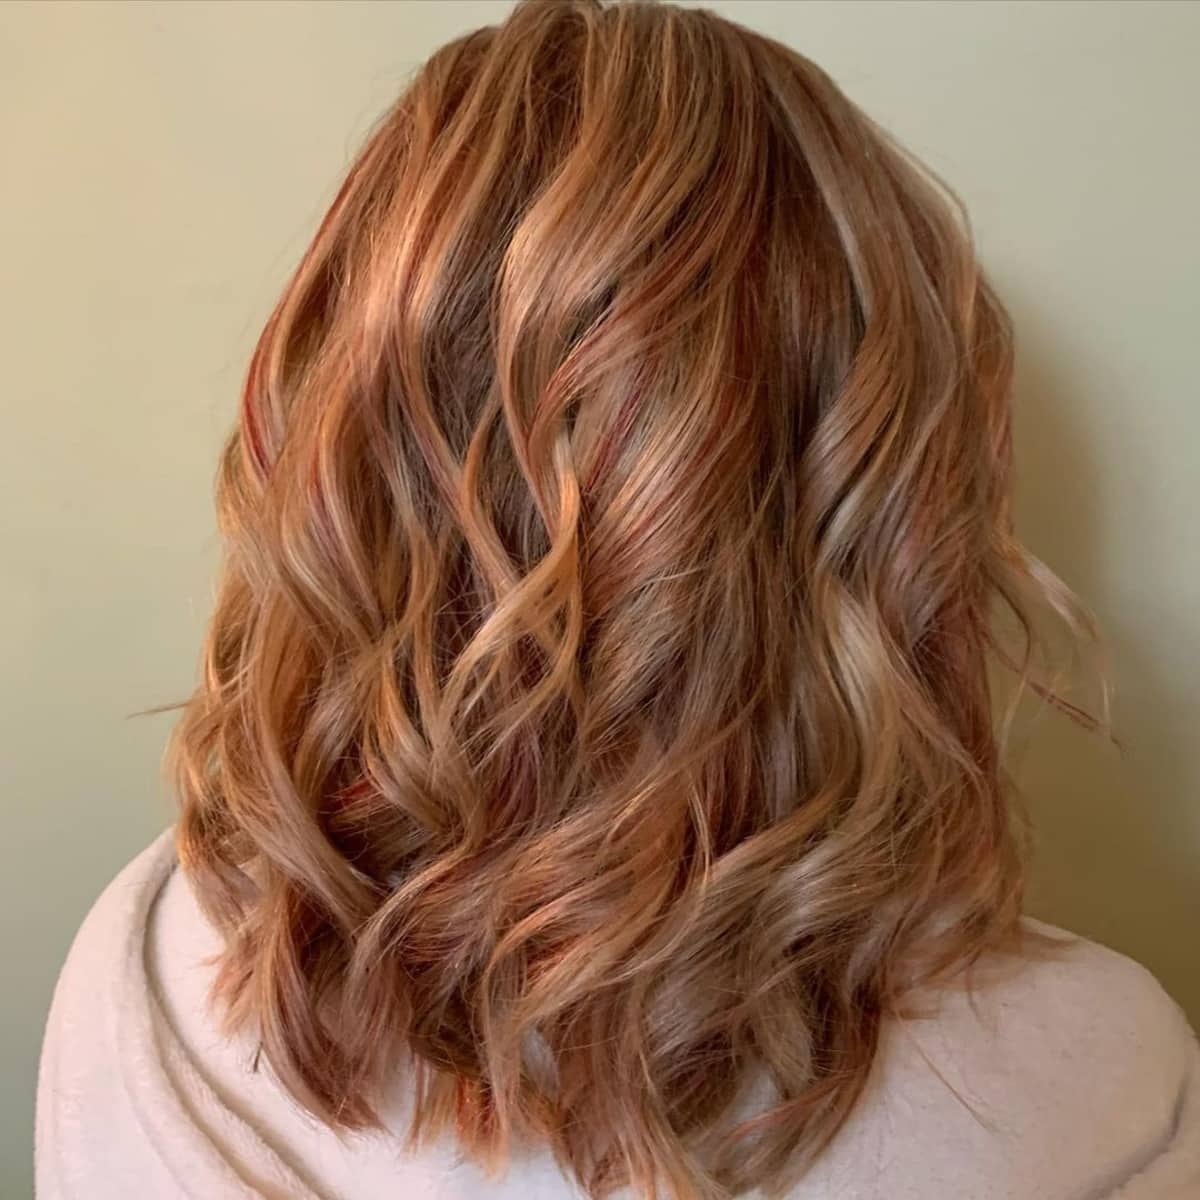 Strawberry blonde curly hair